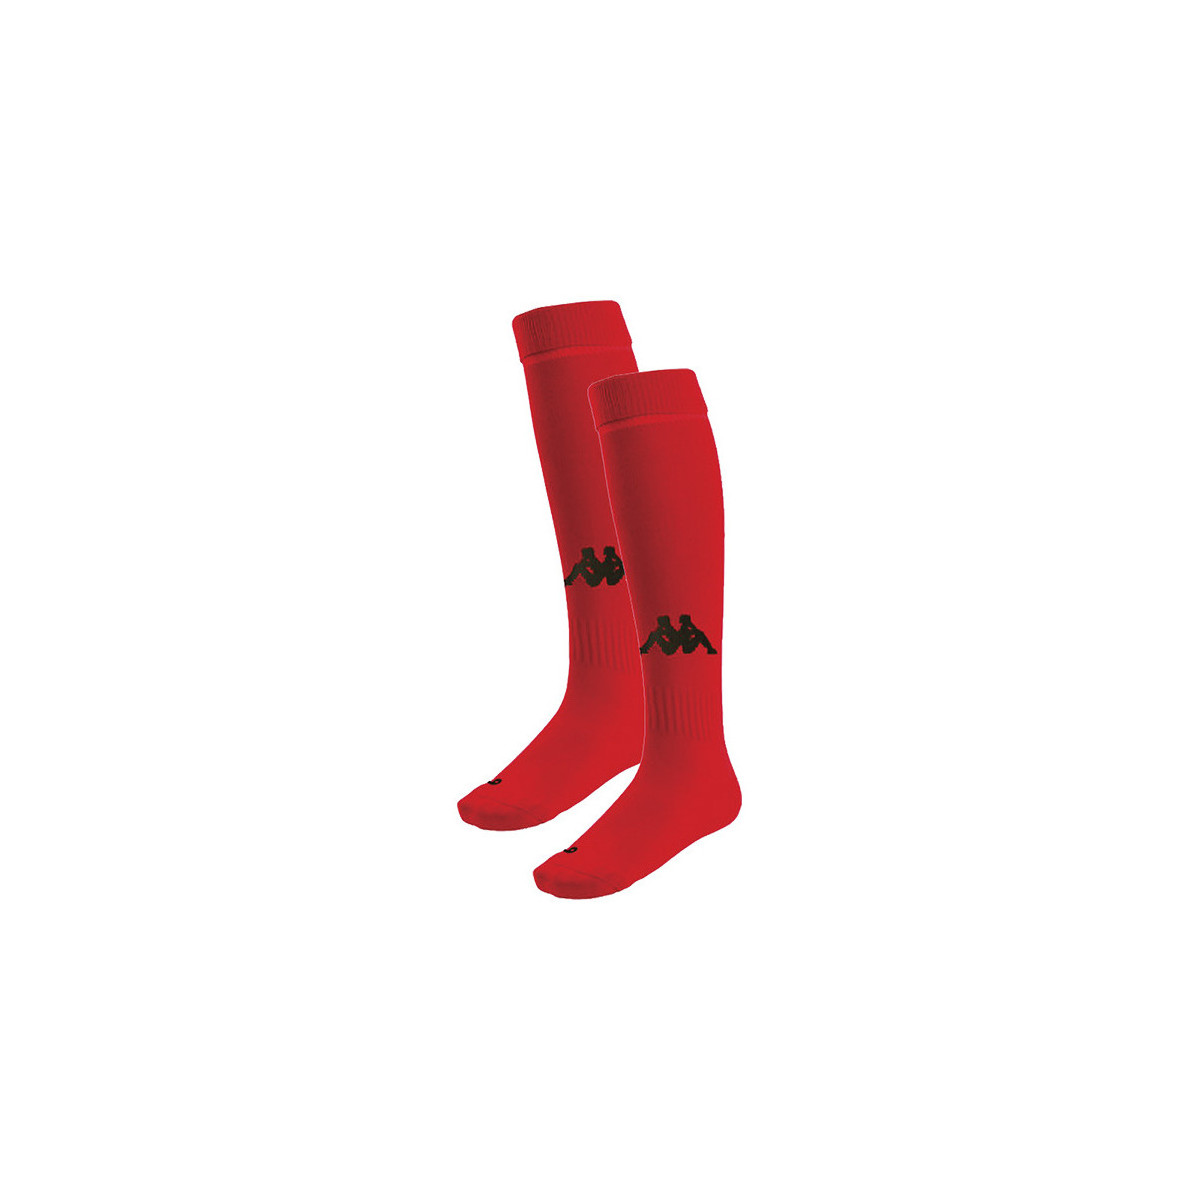 Kappa Rouge Chaussettes Penao (3 paires) NEAEIPAN